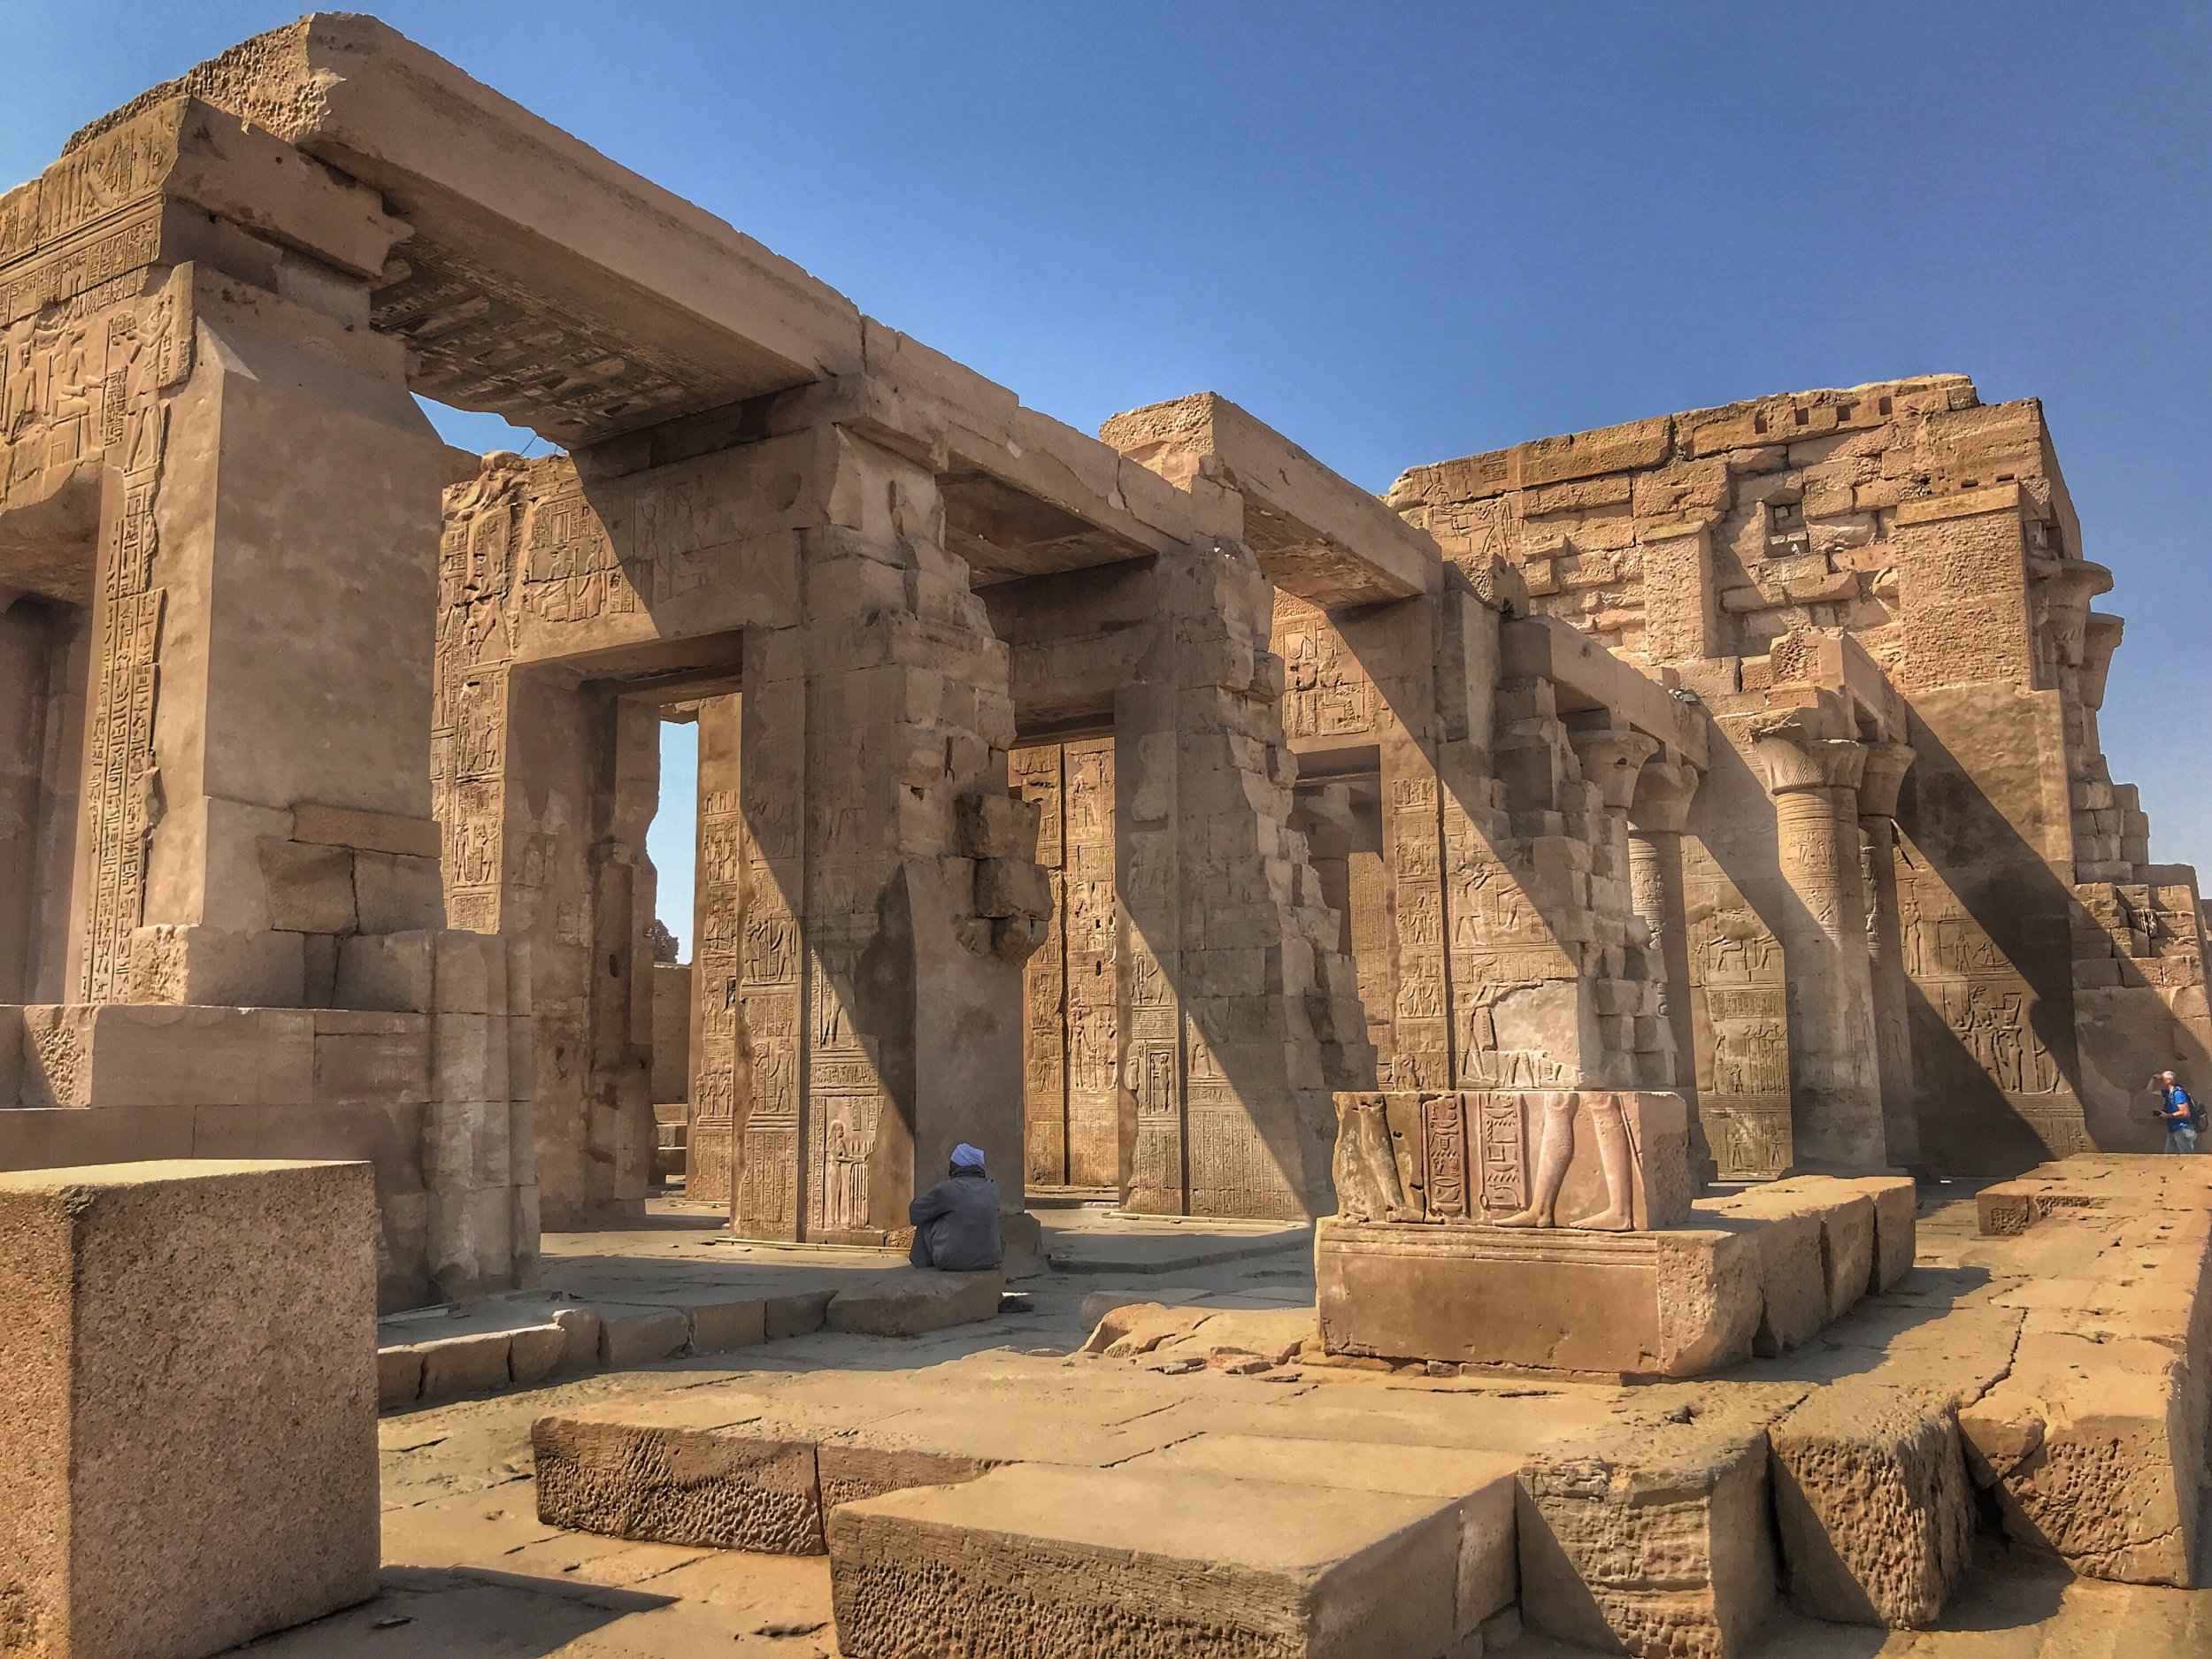 Kom Ombo: The Dual Temple of Horus and Sobek